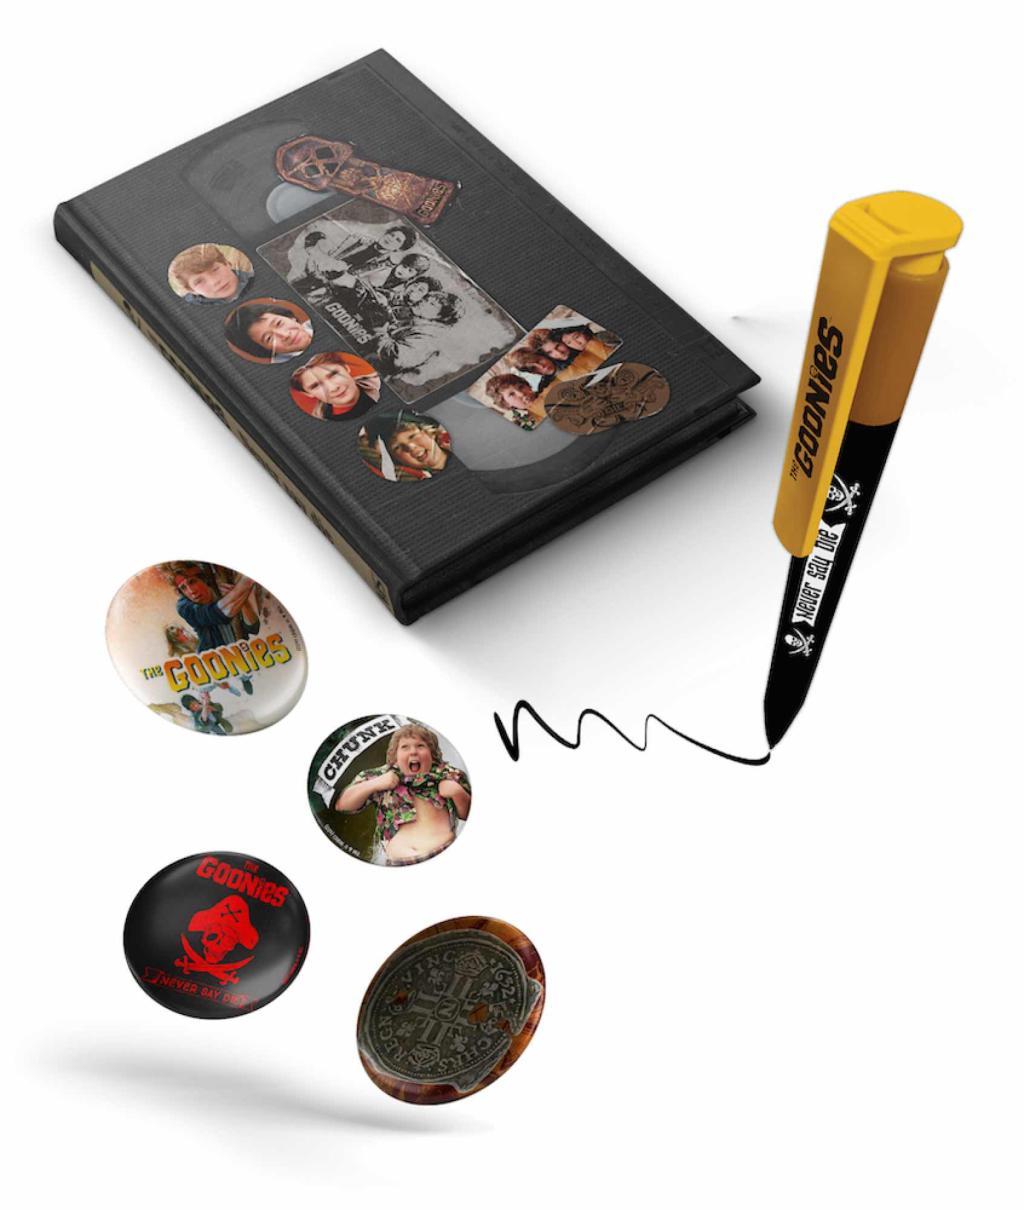 THE GOONIES - Set VHS - Stationery Set (Notebook, Badges and Pen)